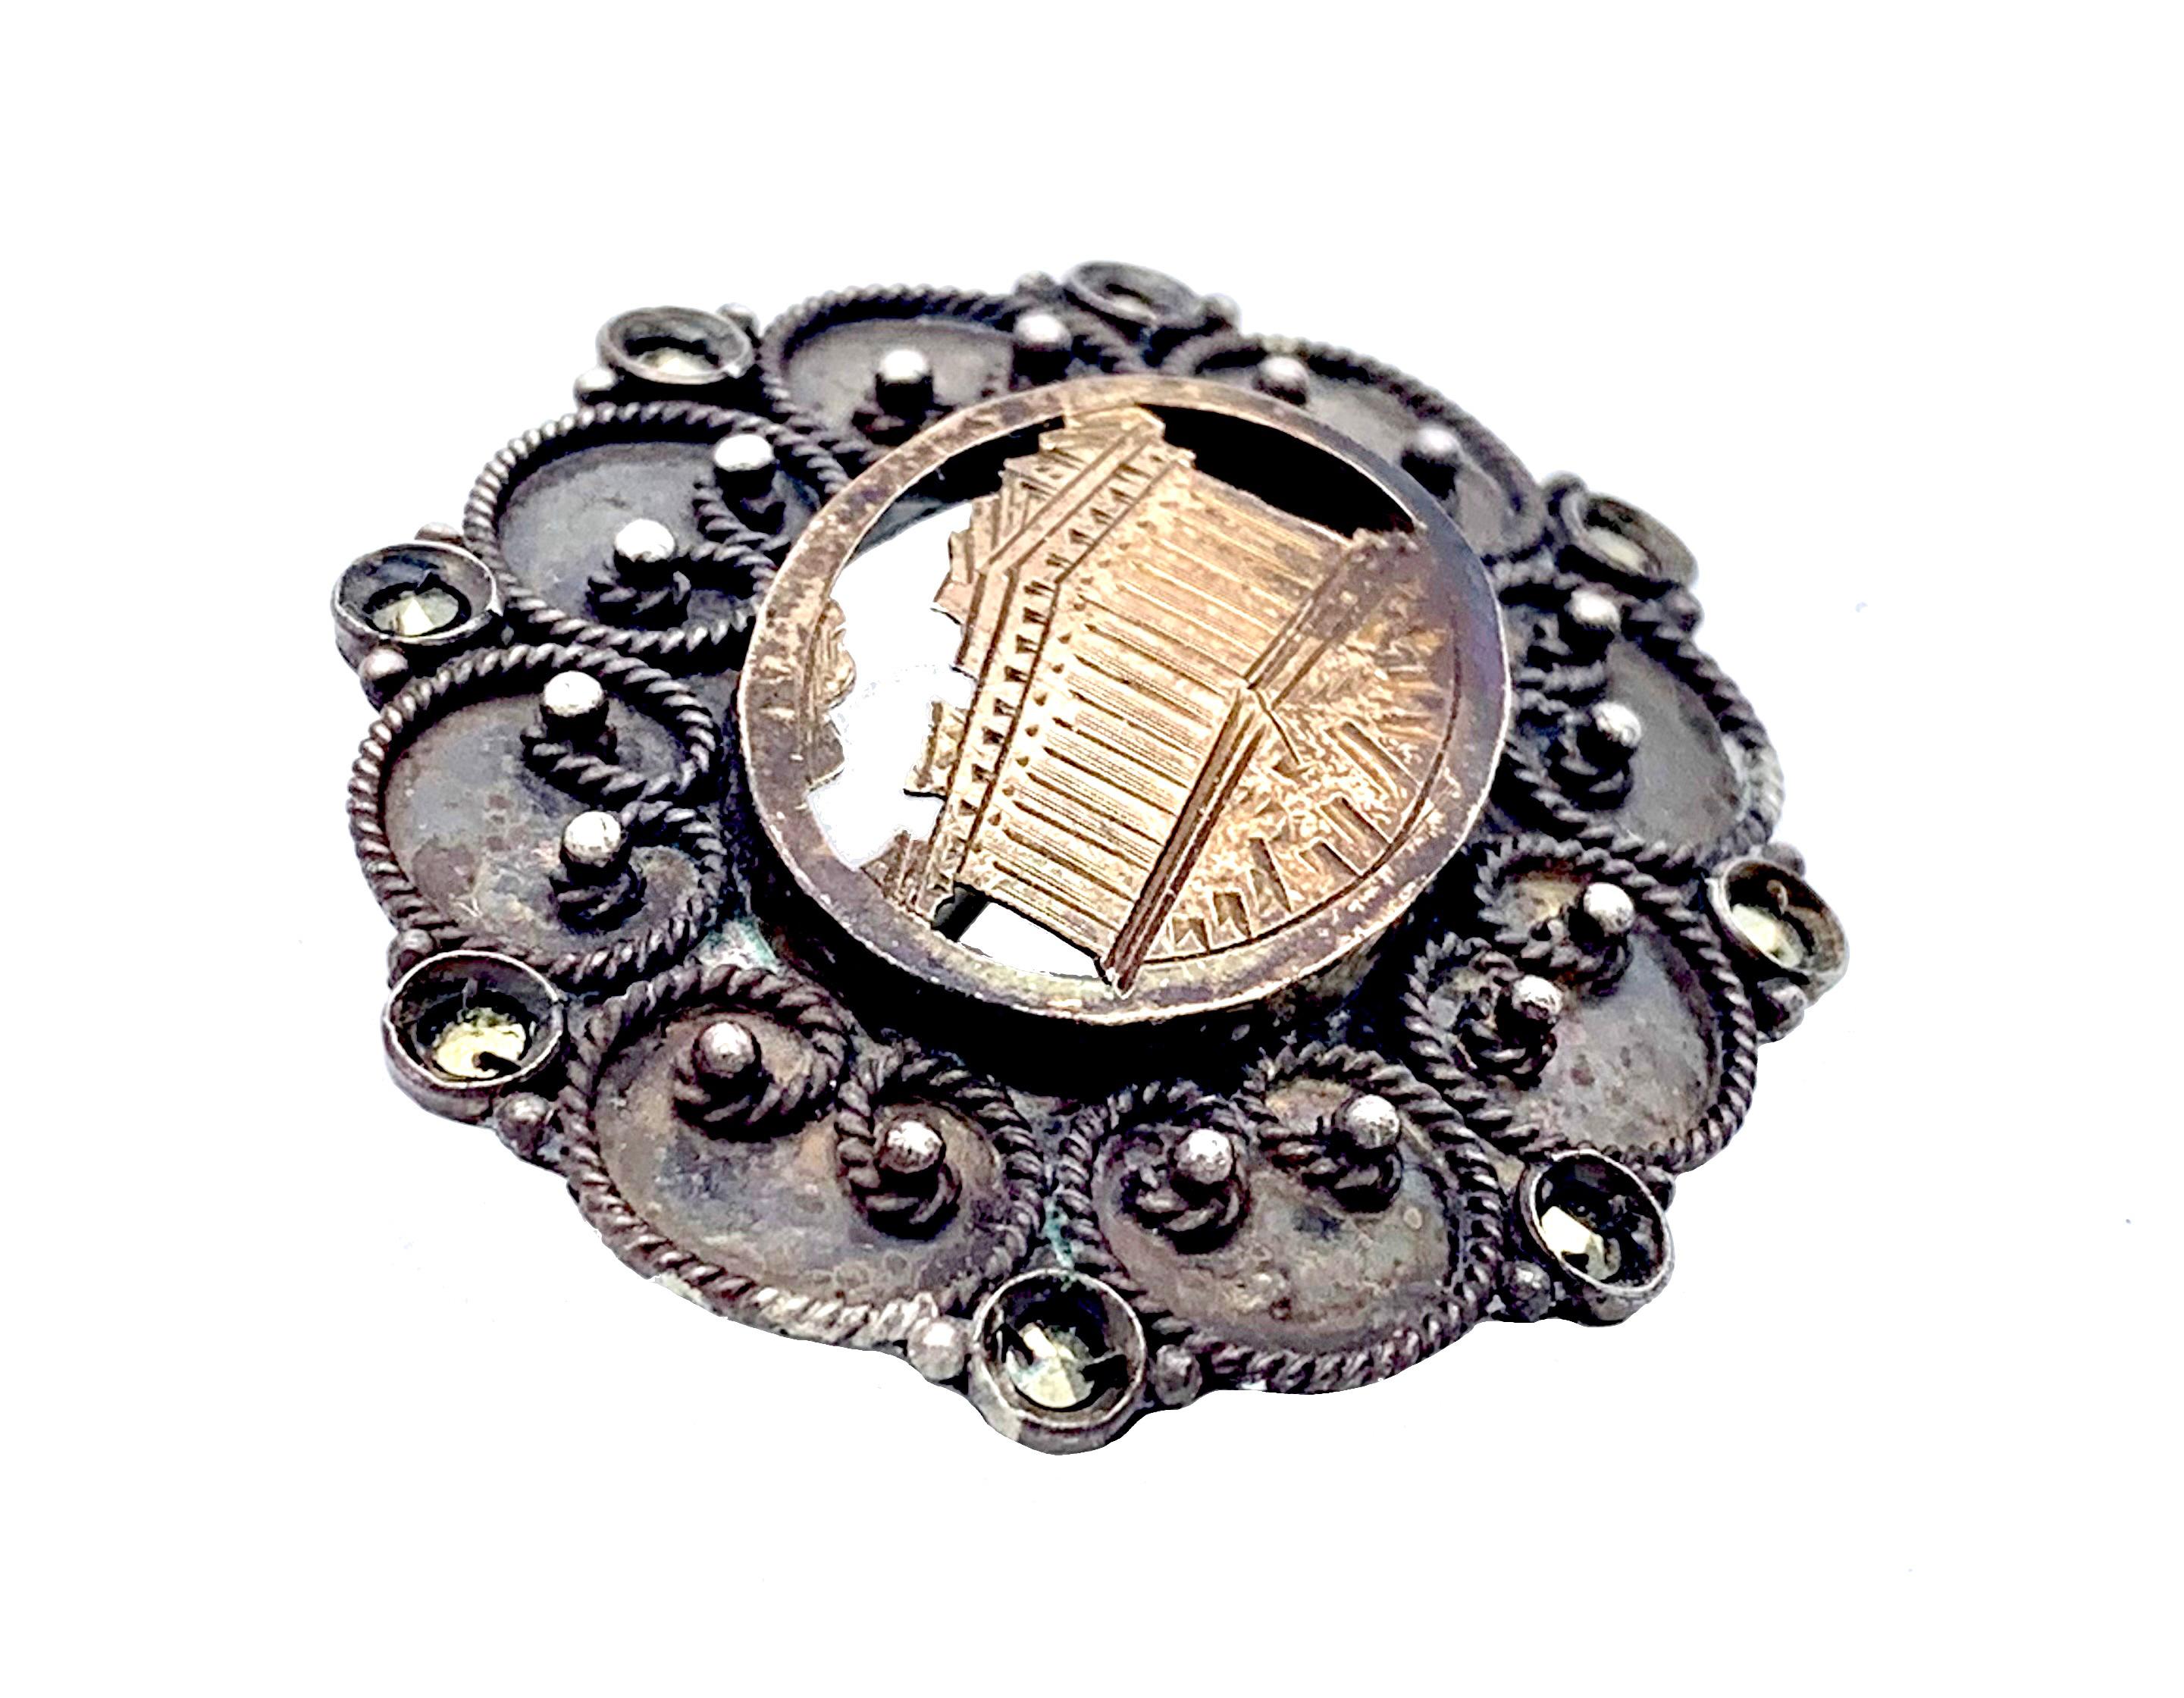 This unusual brooch features a typical Greek Grand Tour image, that of the Acropolis and the Parthenon.  In an oval frame we see the cut out silver gilt image of parts of the Acropolis, the Parthenon and a few clouds, highlighted in rose gold